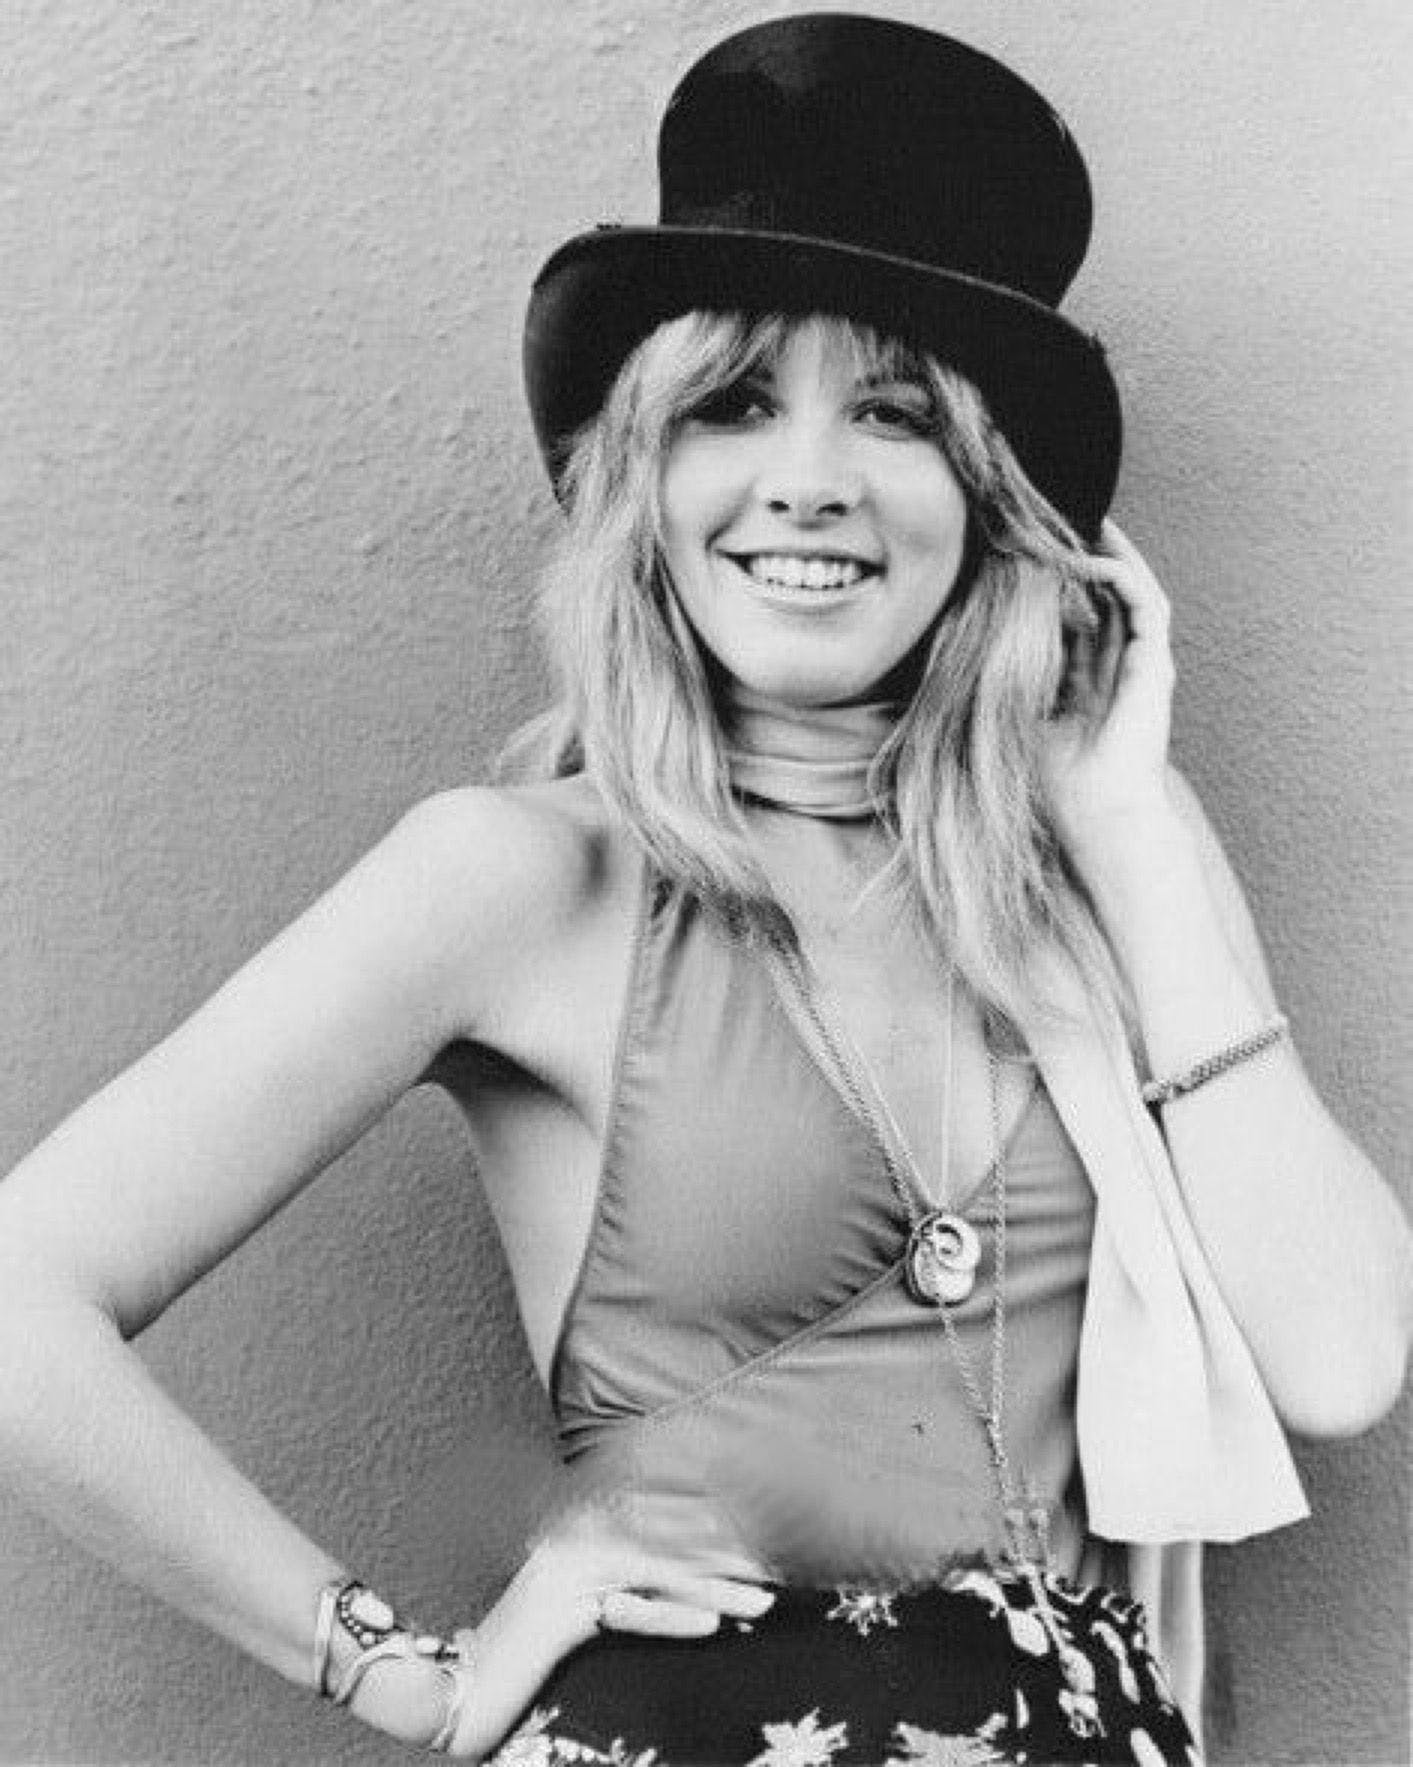 Rock legend Stevie Nicks and the style that goes with the years - 16